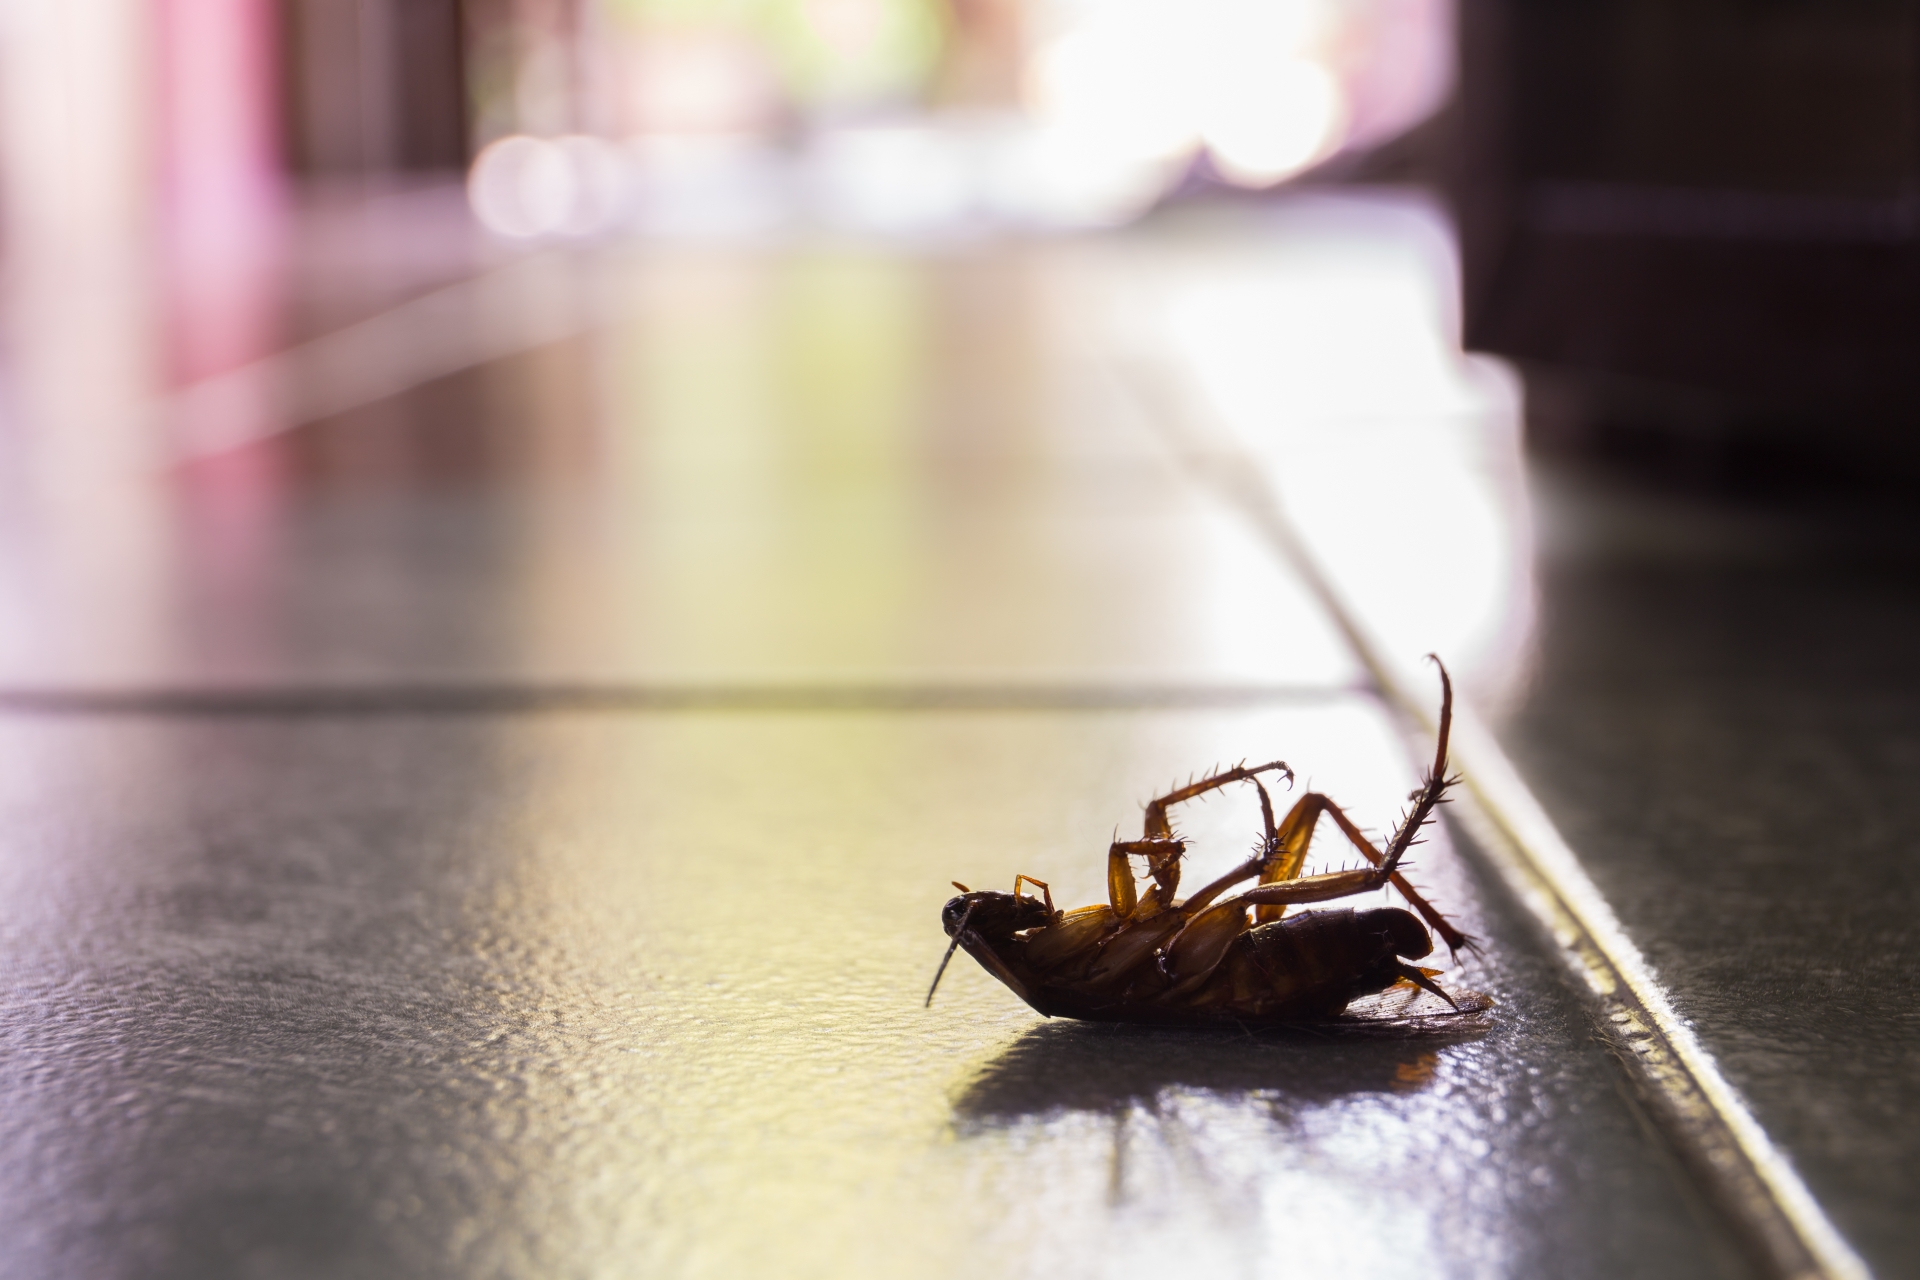 Cockroach Control, Pest Control in Streatham Hill, SW2. Call Now 020 8166 9746